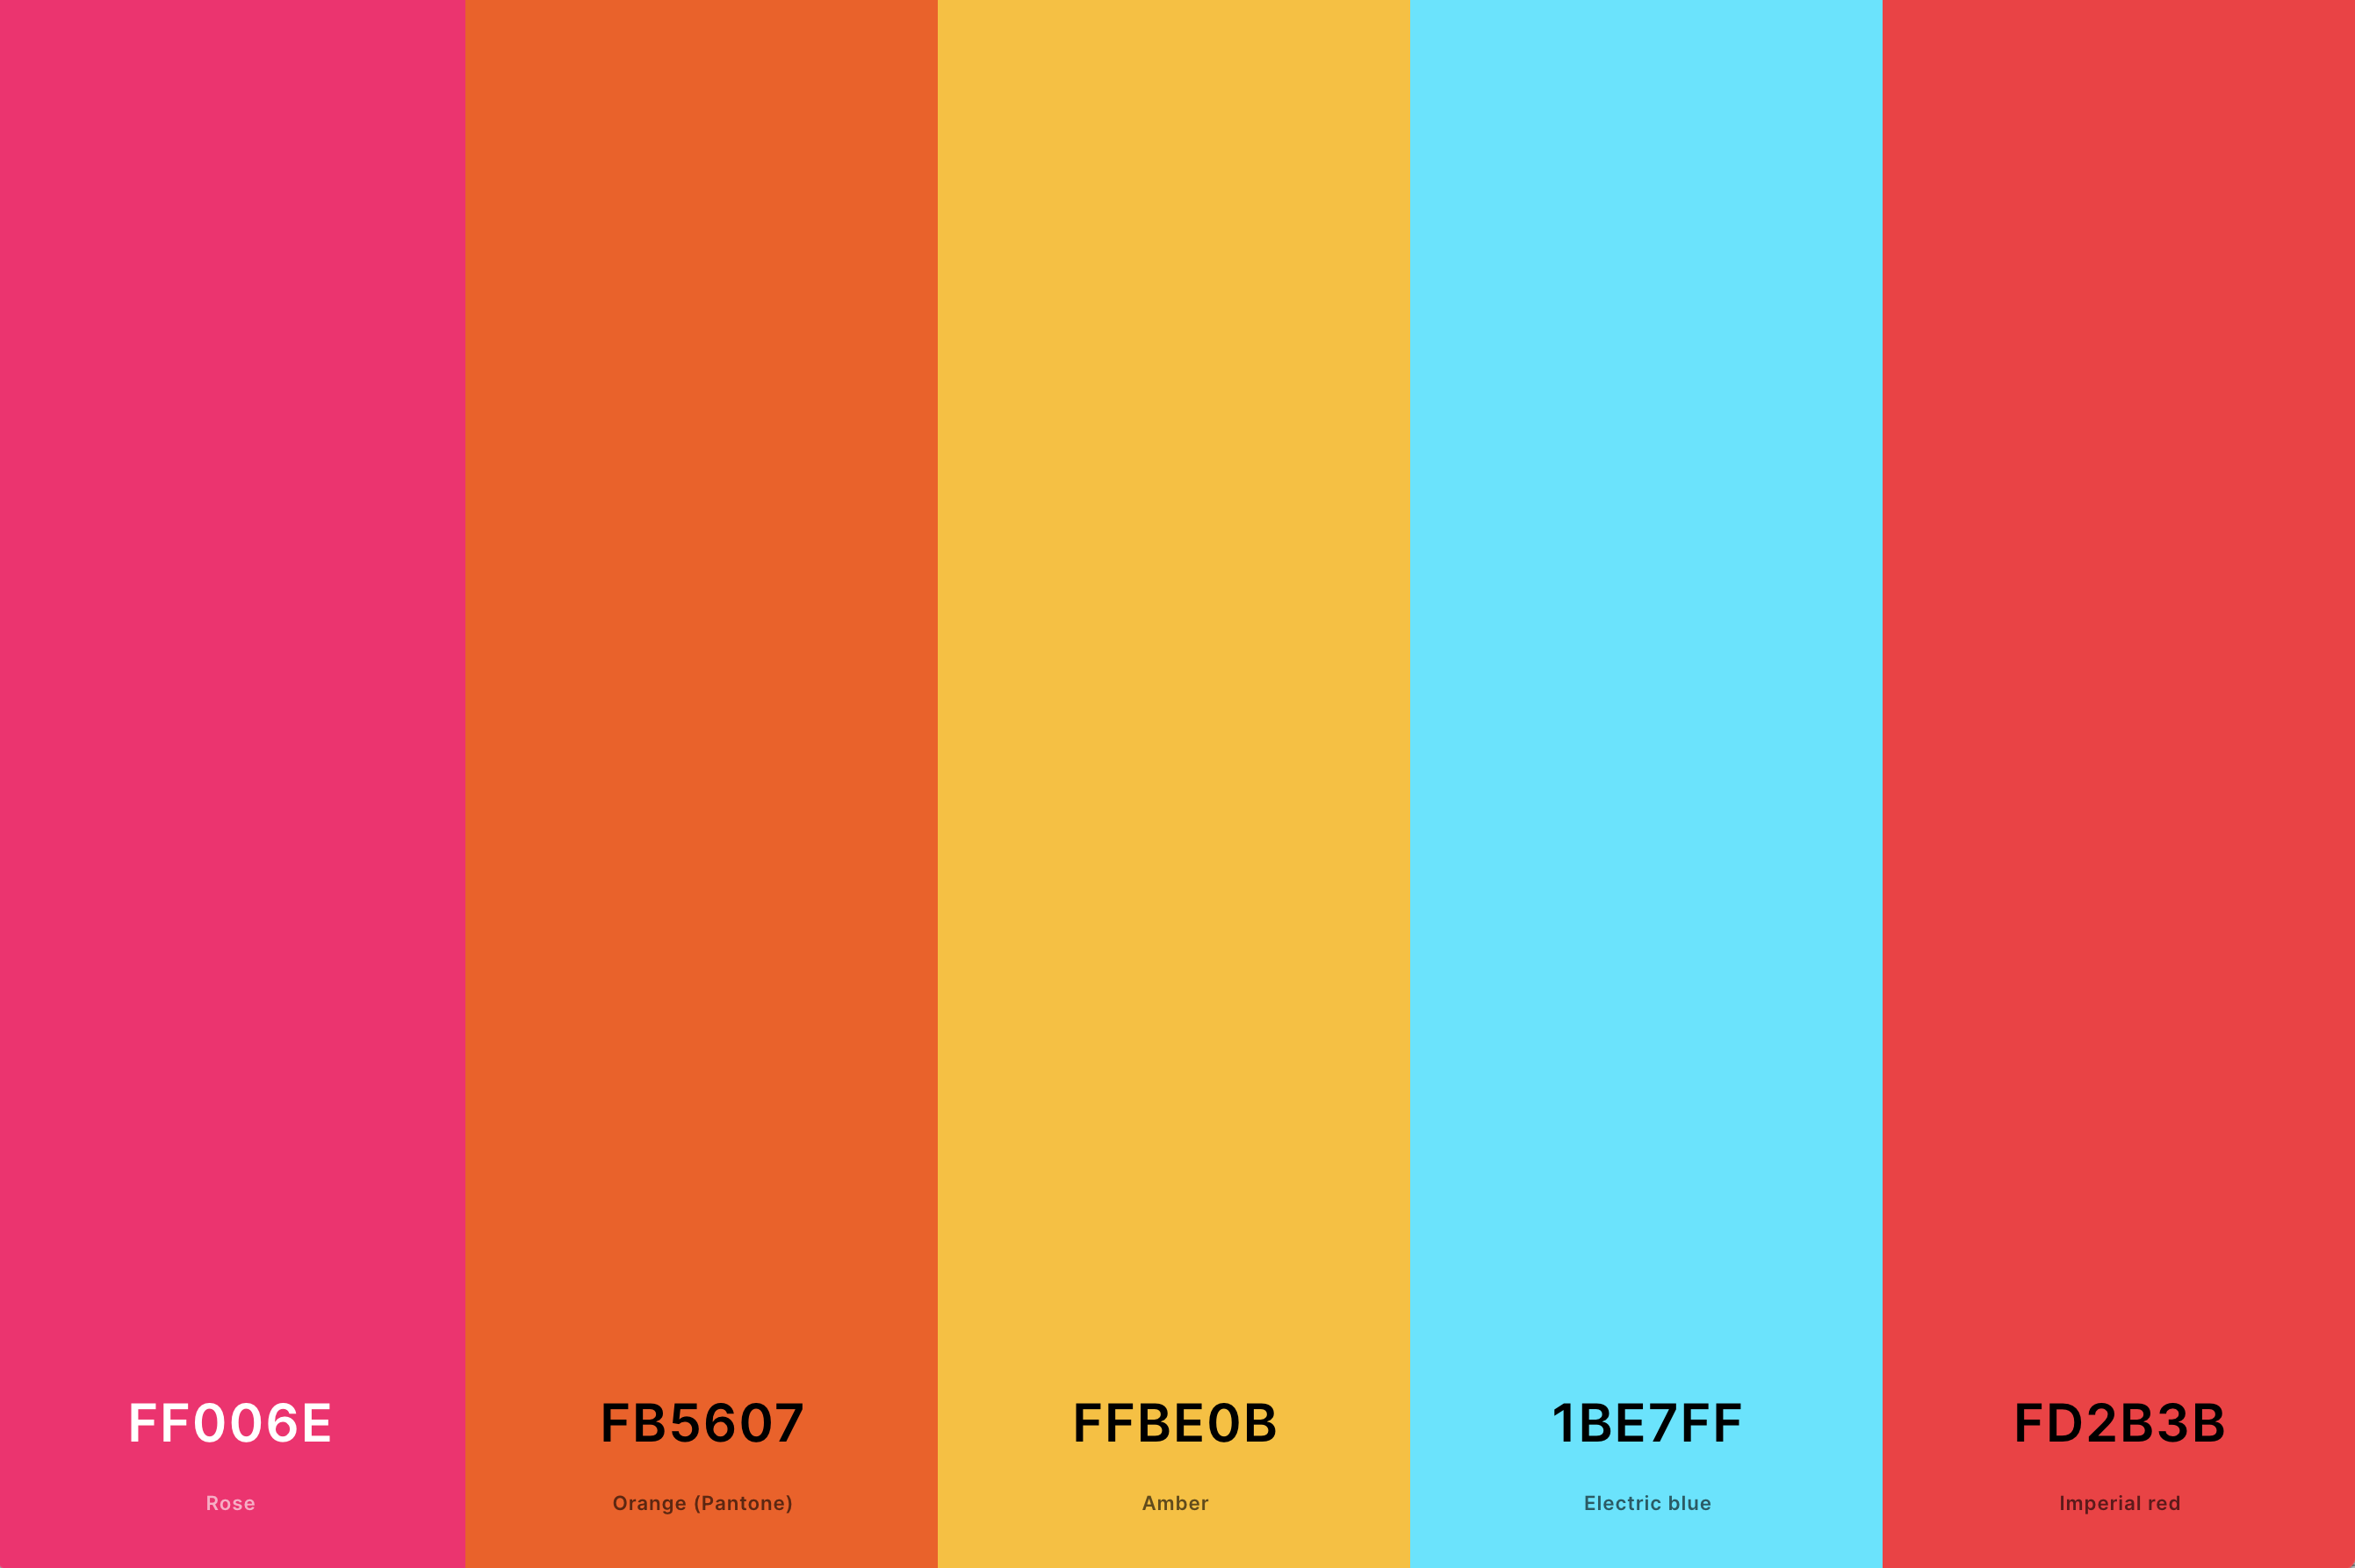 21. Neon Orange Color Palette Color Palette with Rose (Hex #FF006E) + Orange (Pantone) (Hex #FB5607) + Amber (Hex #FFBE0B) + Electric Blue (Hex #1BE7FF) + Imperial Red (Hex #FD2B3B) Color Palette with Hex Codes